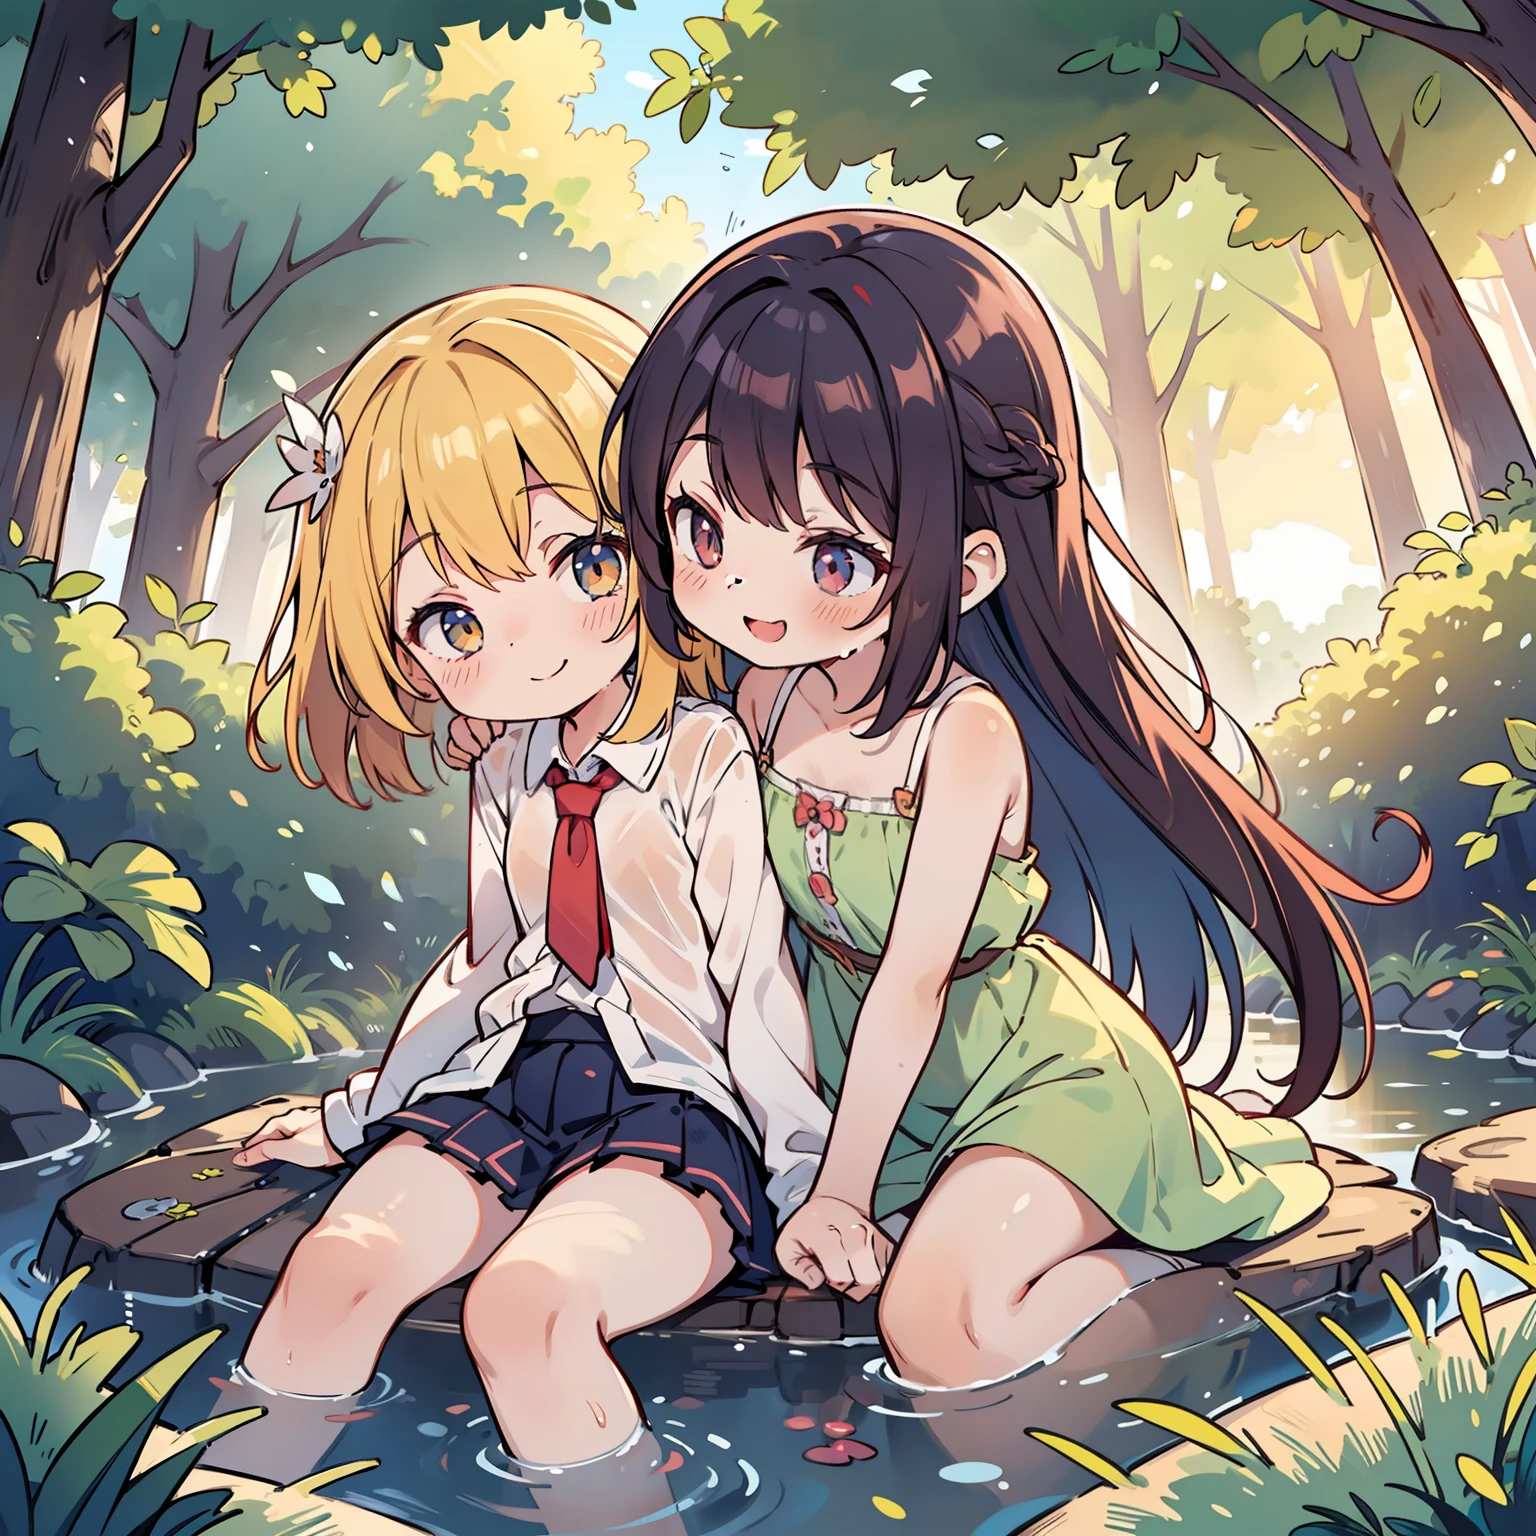 Horny lolis touching eachother lewdly, wooded setting, small creek, smiling, different hair colors, tanlines, romantic setting, sunset, wet crotches